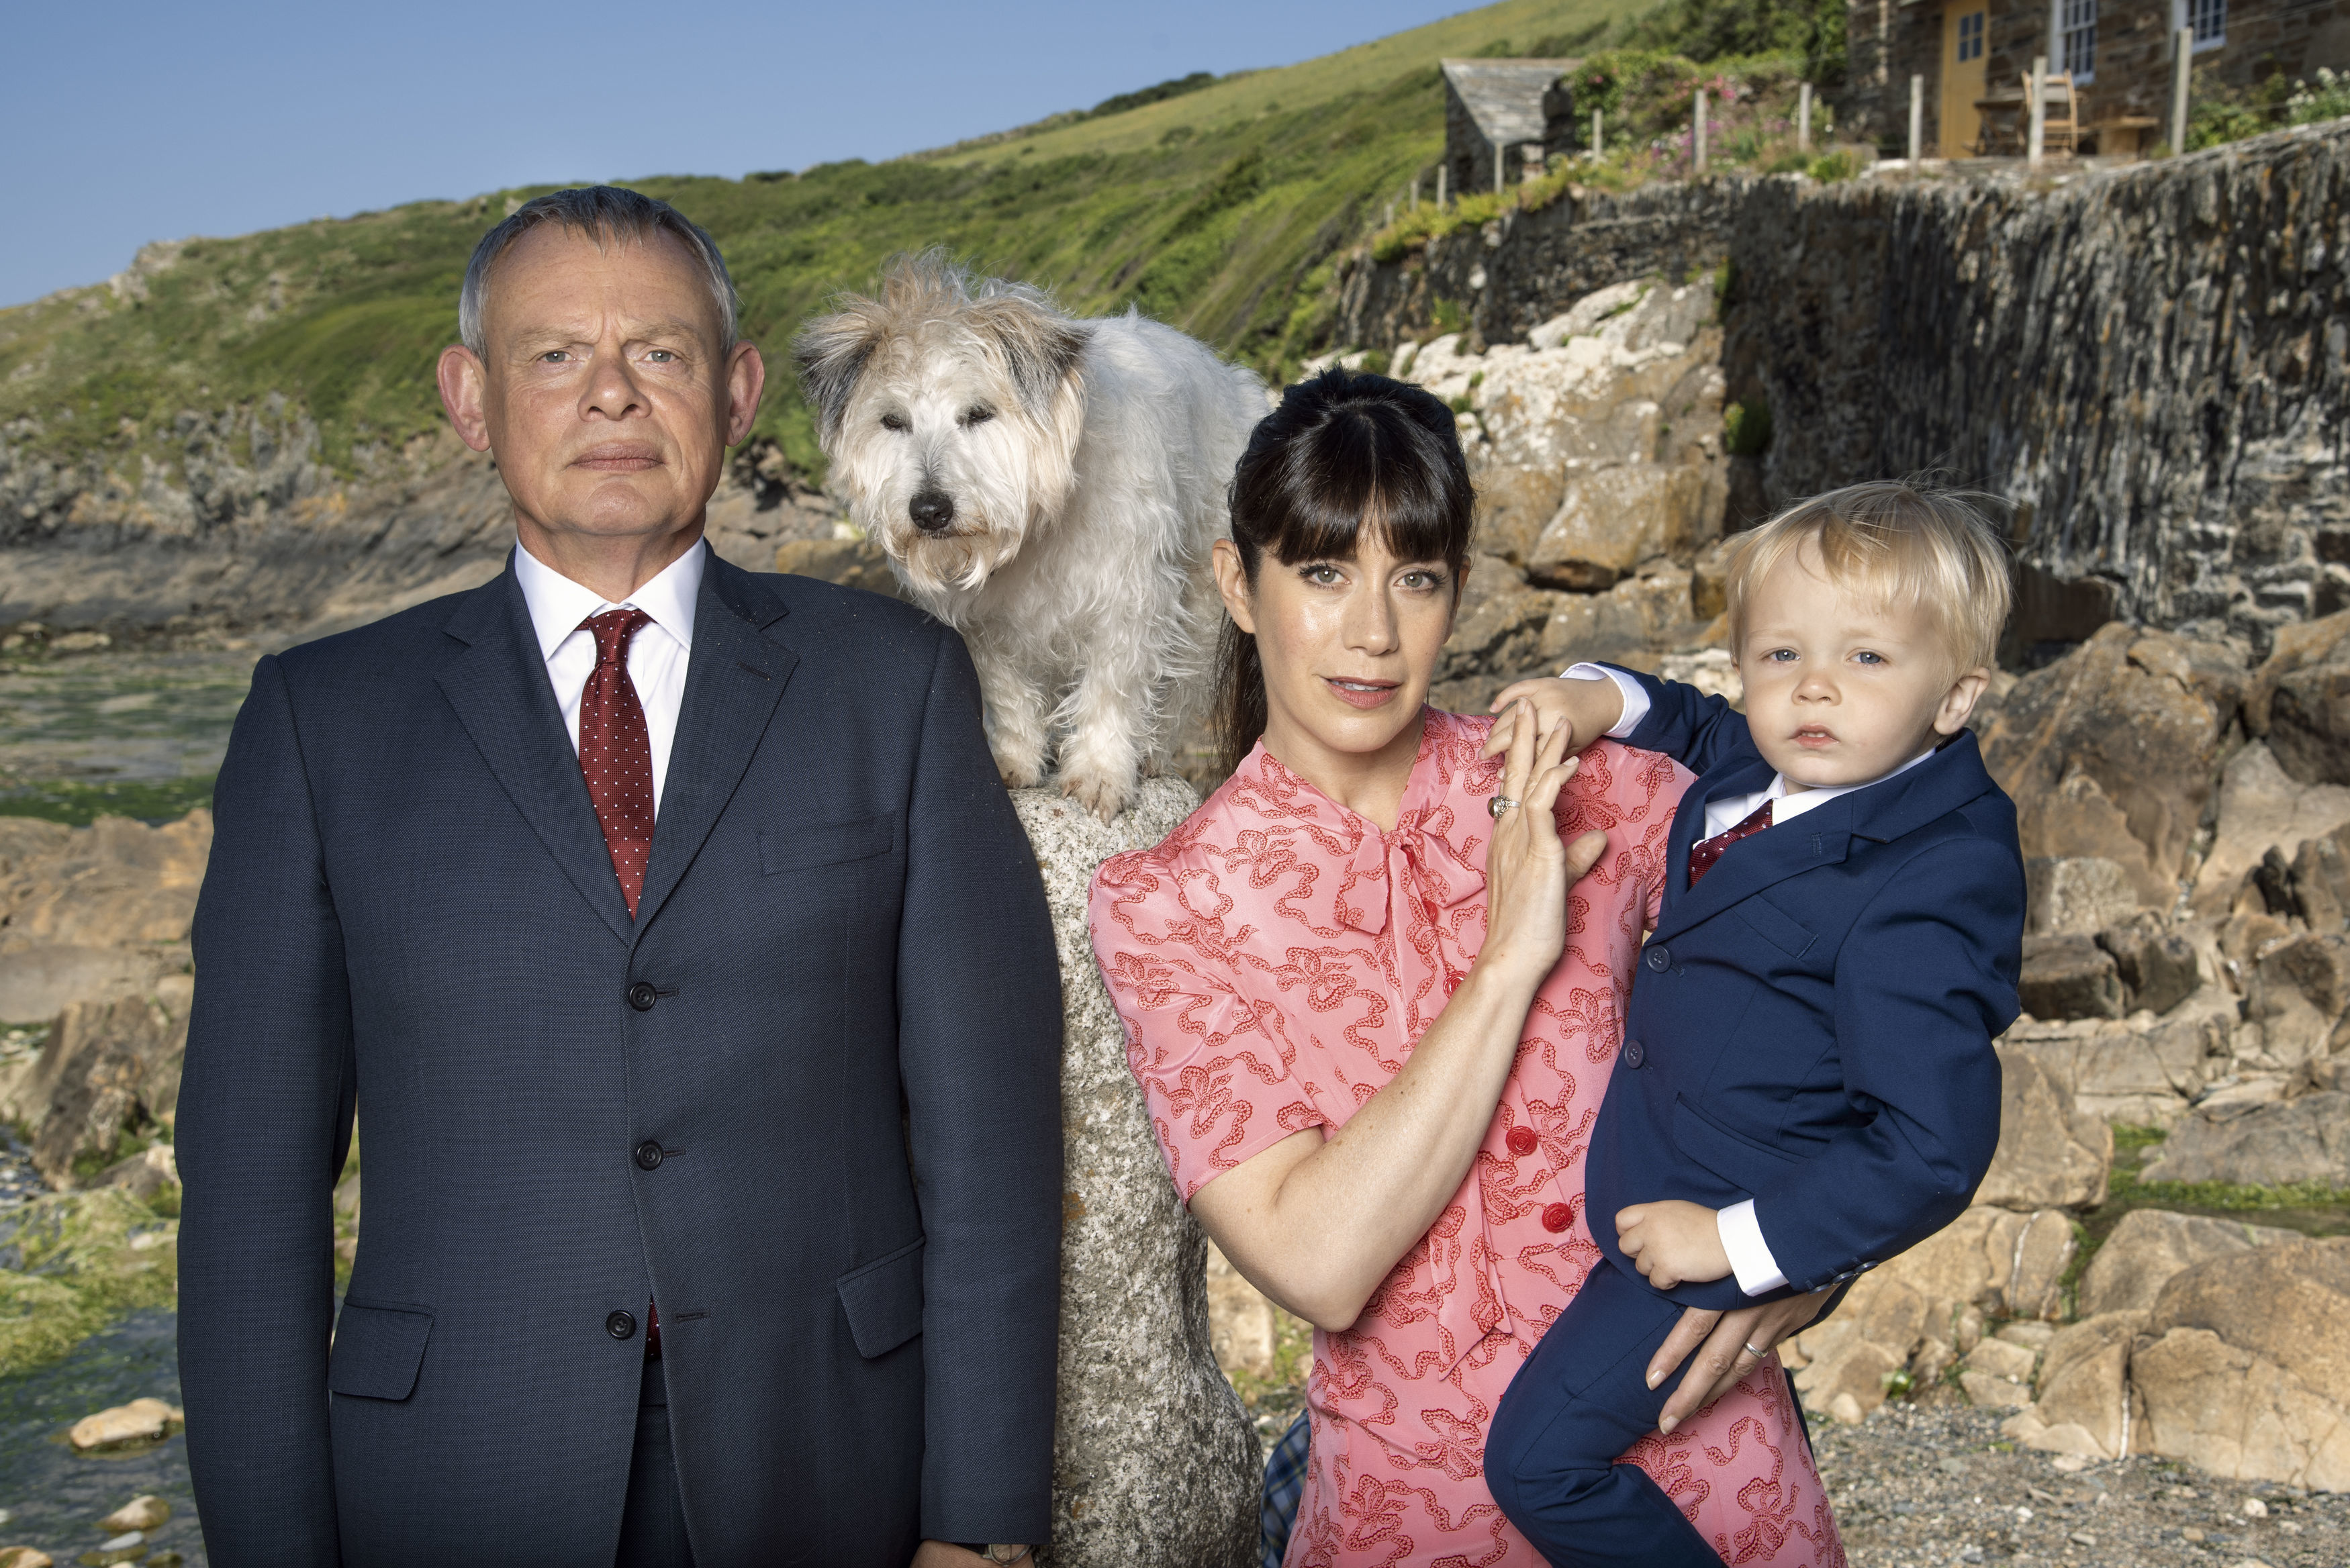 Martin Clunes and Caroline Catz as Doc Martin and Louisa, with little James Henry